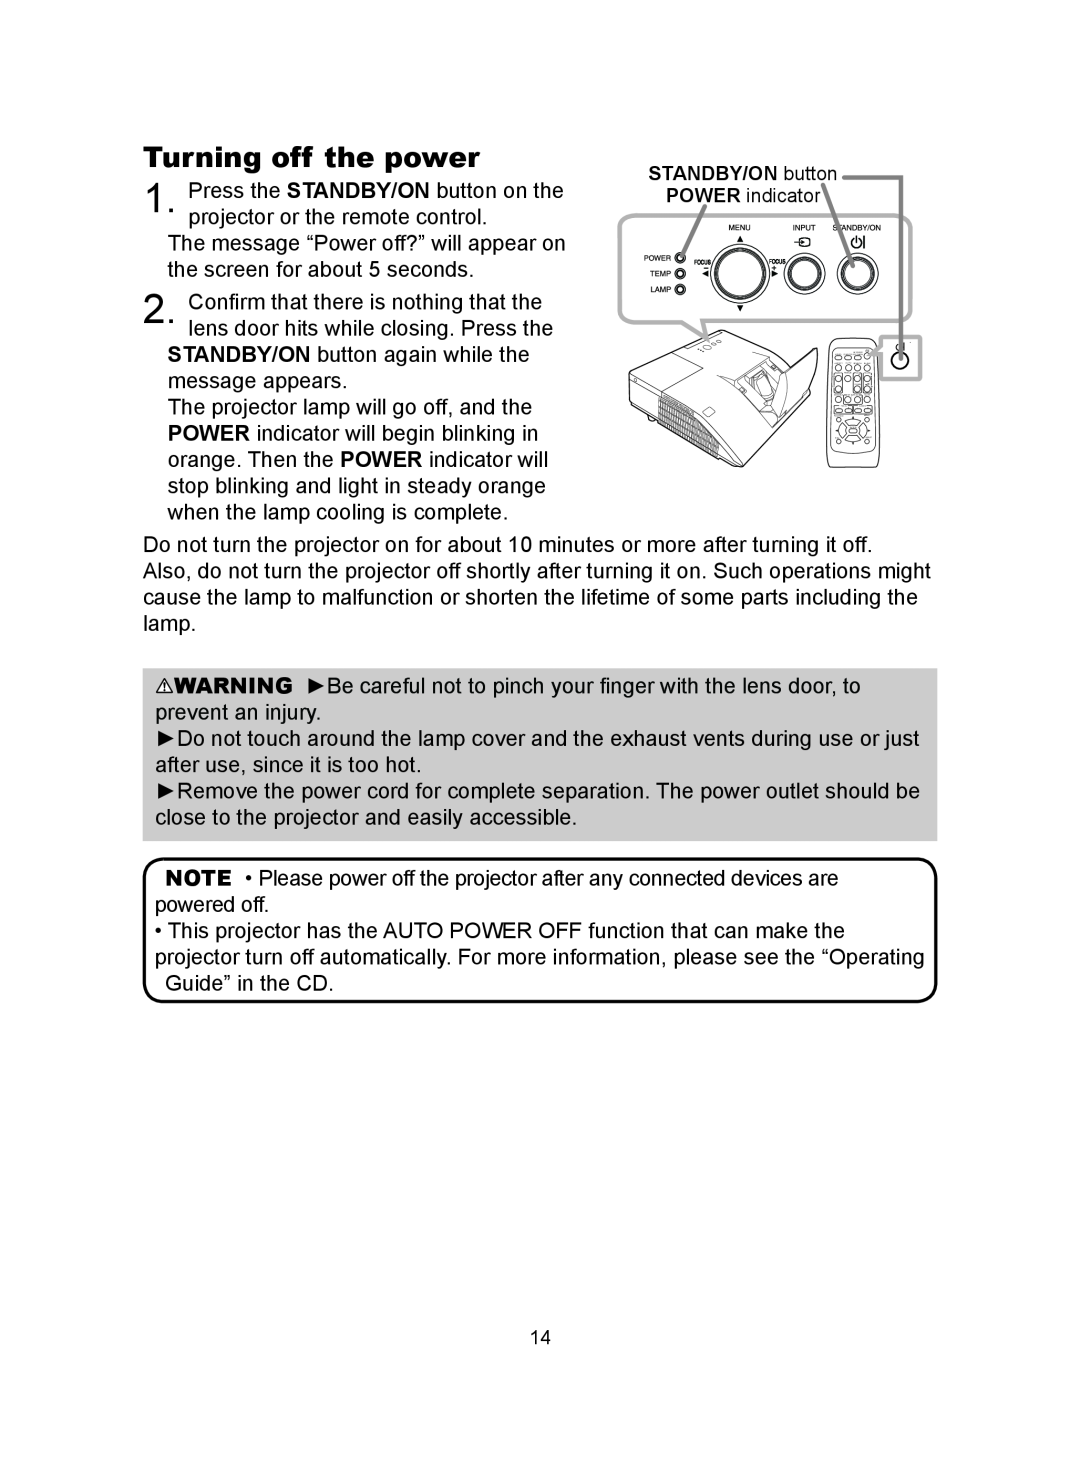 Dukane 8104HW user manual Turning off the power 